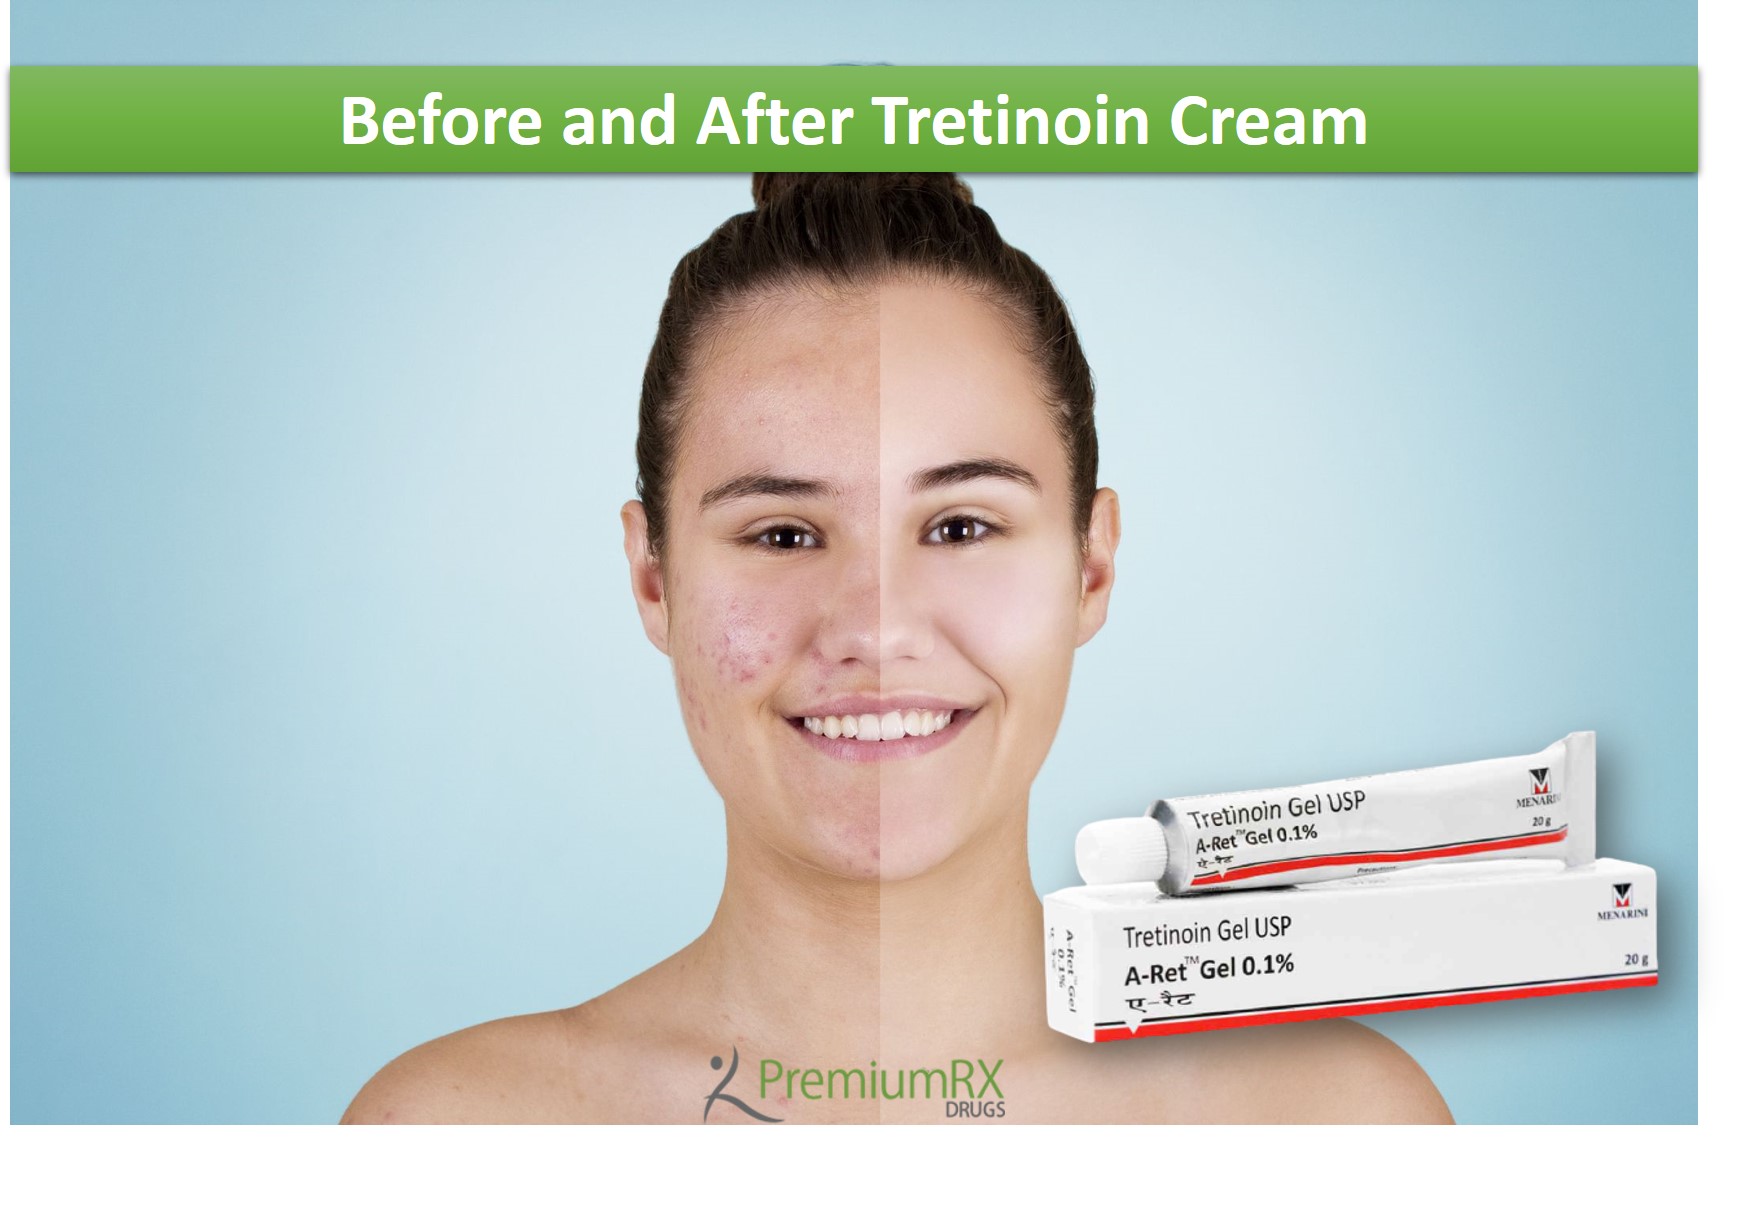 Before and After Tretinoin Cream